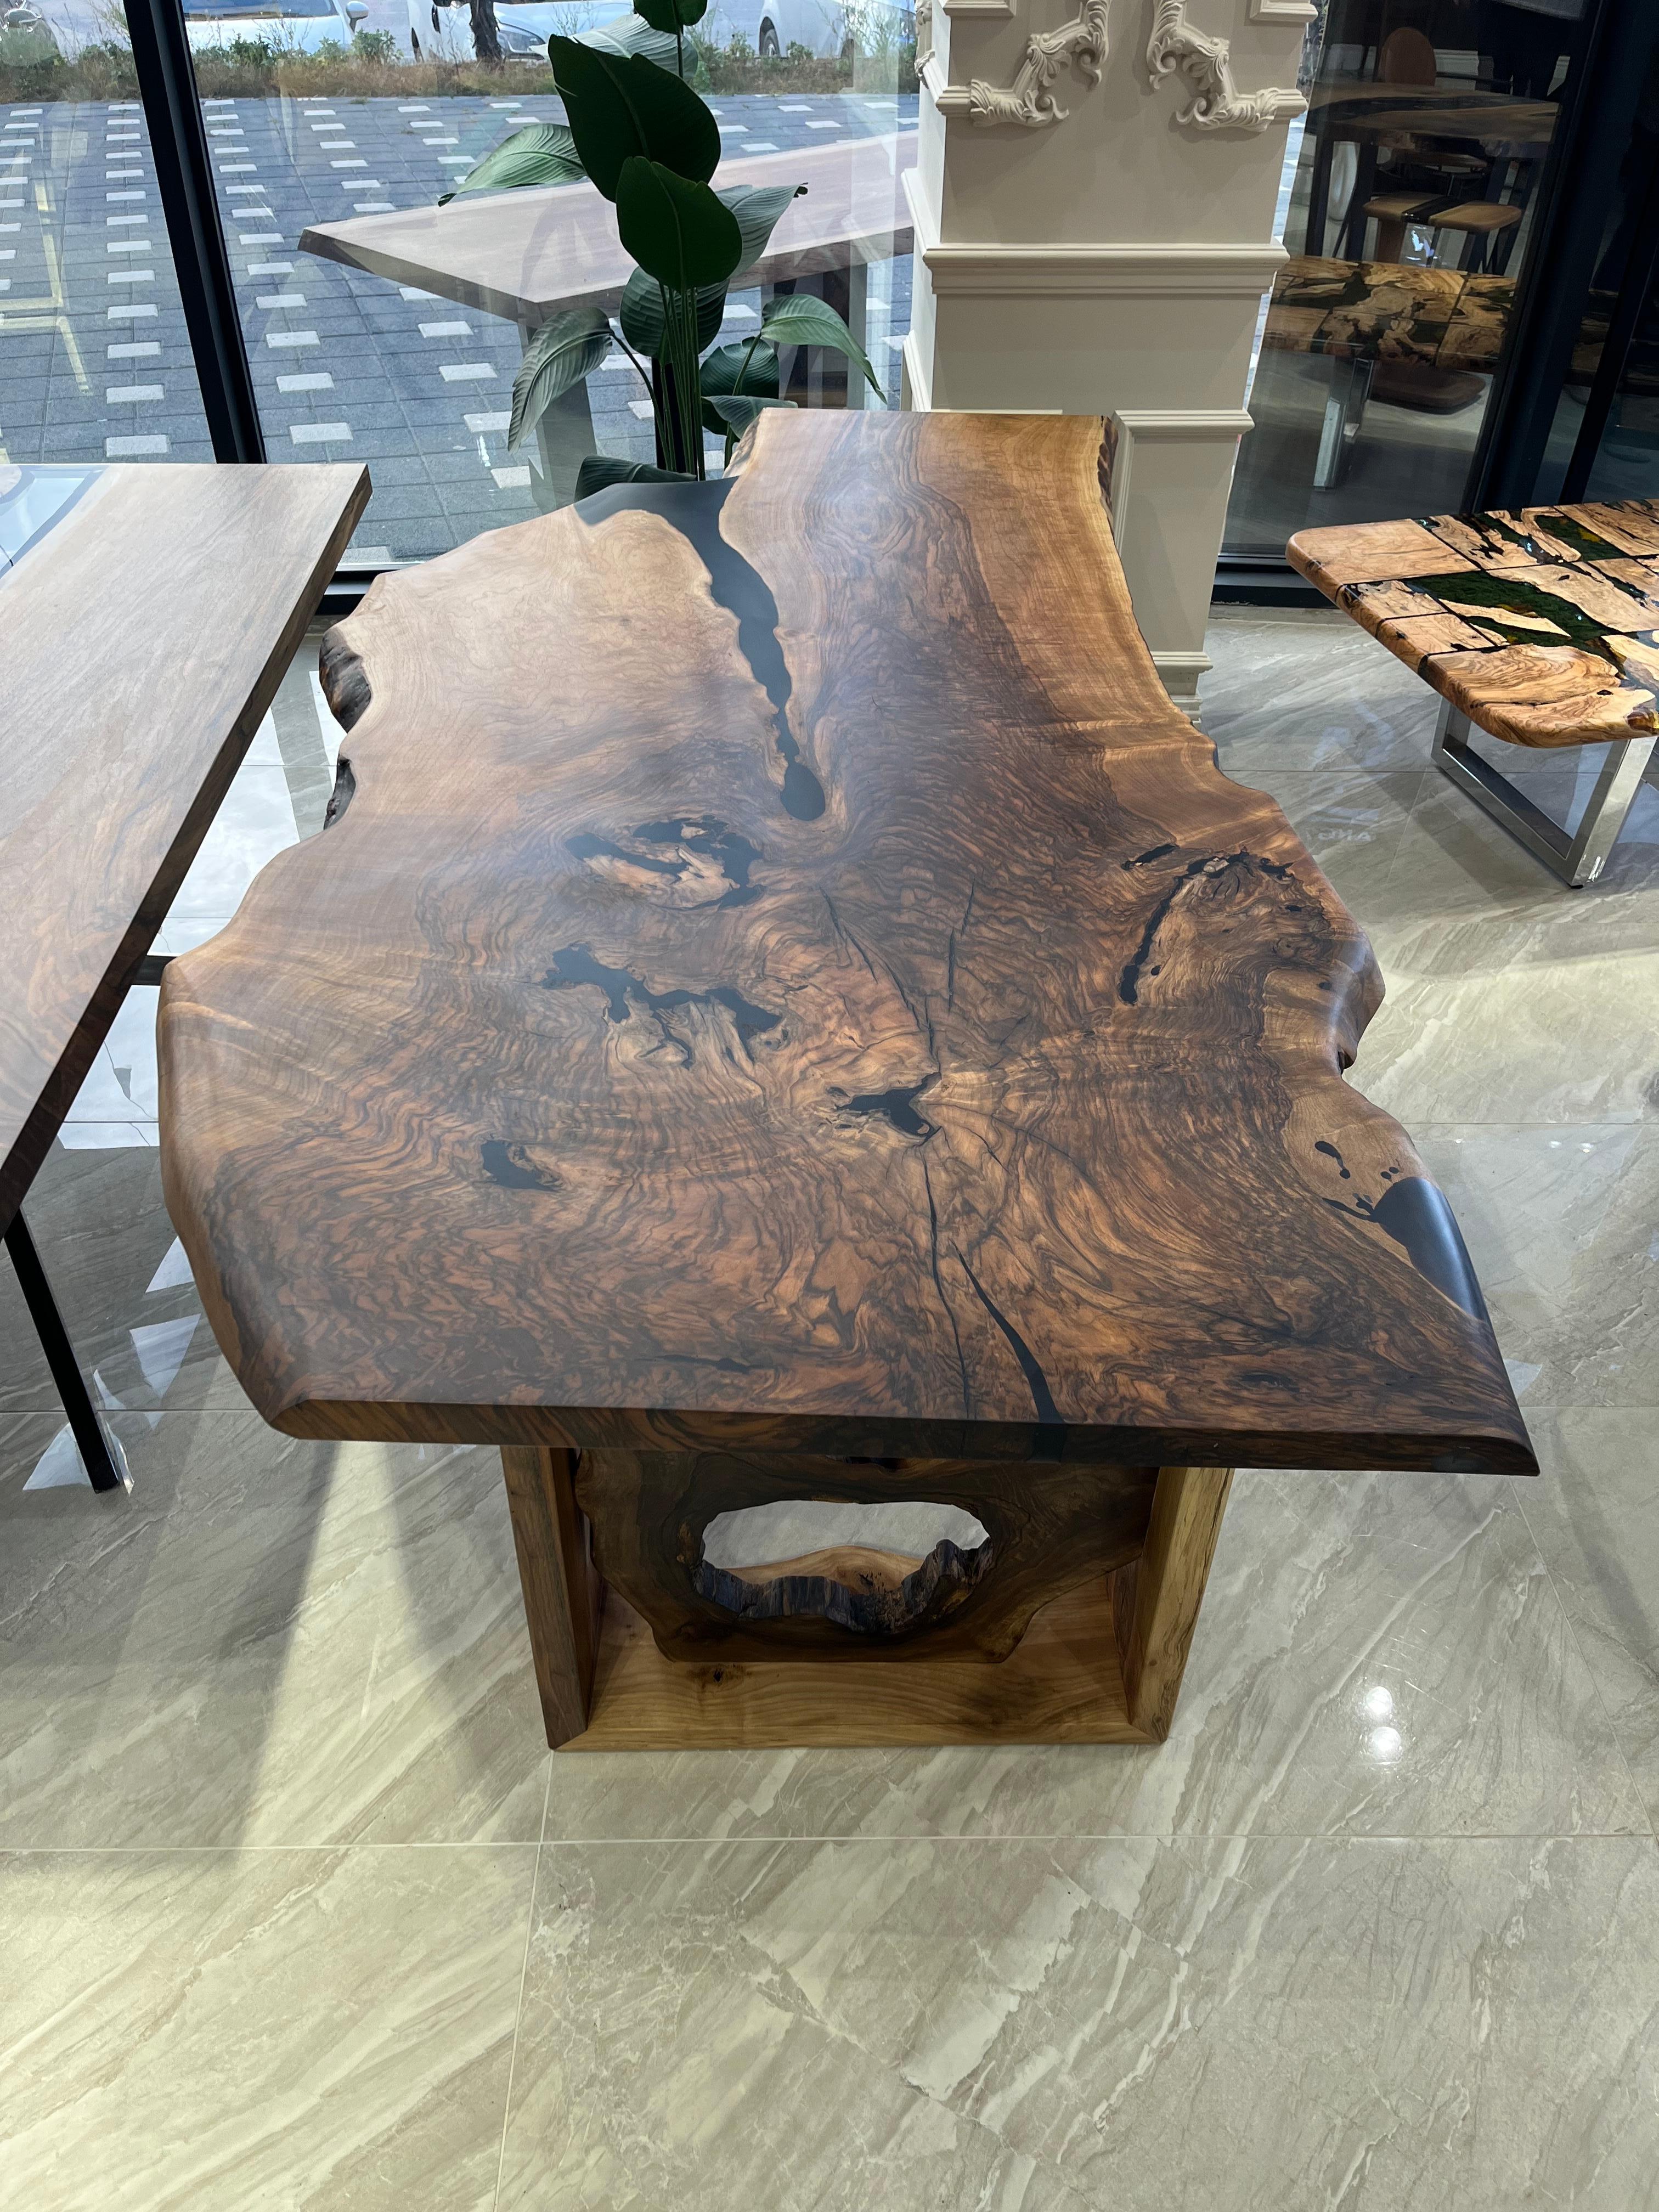 LIVE EDGE WALNUT TABLE

This table is made of natural walnut slabs. 

Some Walnut slabs have a lot of natural beauty as it’s one side has a large curve. This is one of them! 

We've filled the cracks with black epoxy, without disrupting naturalness